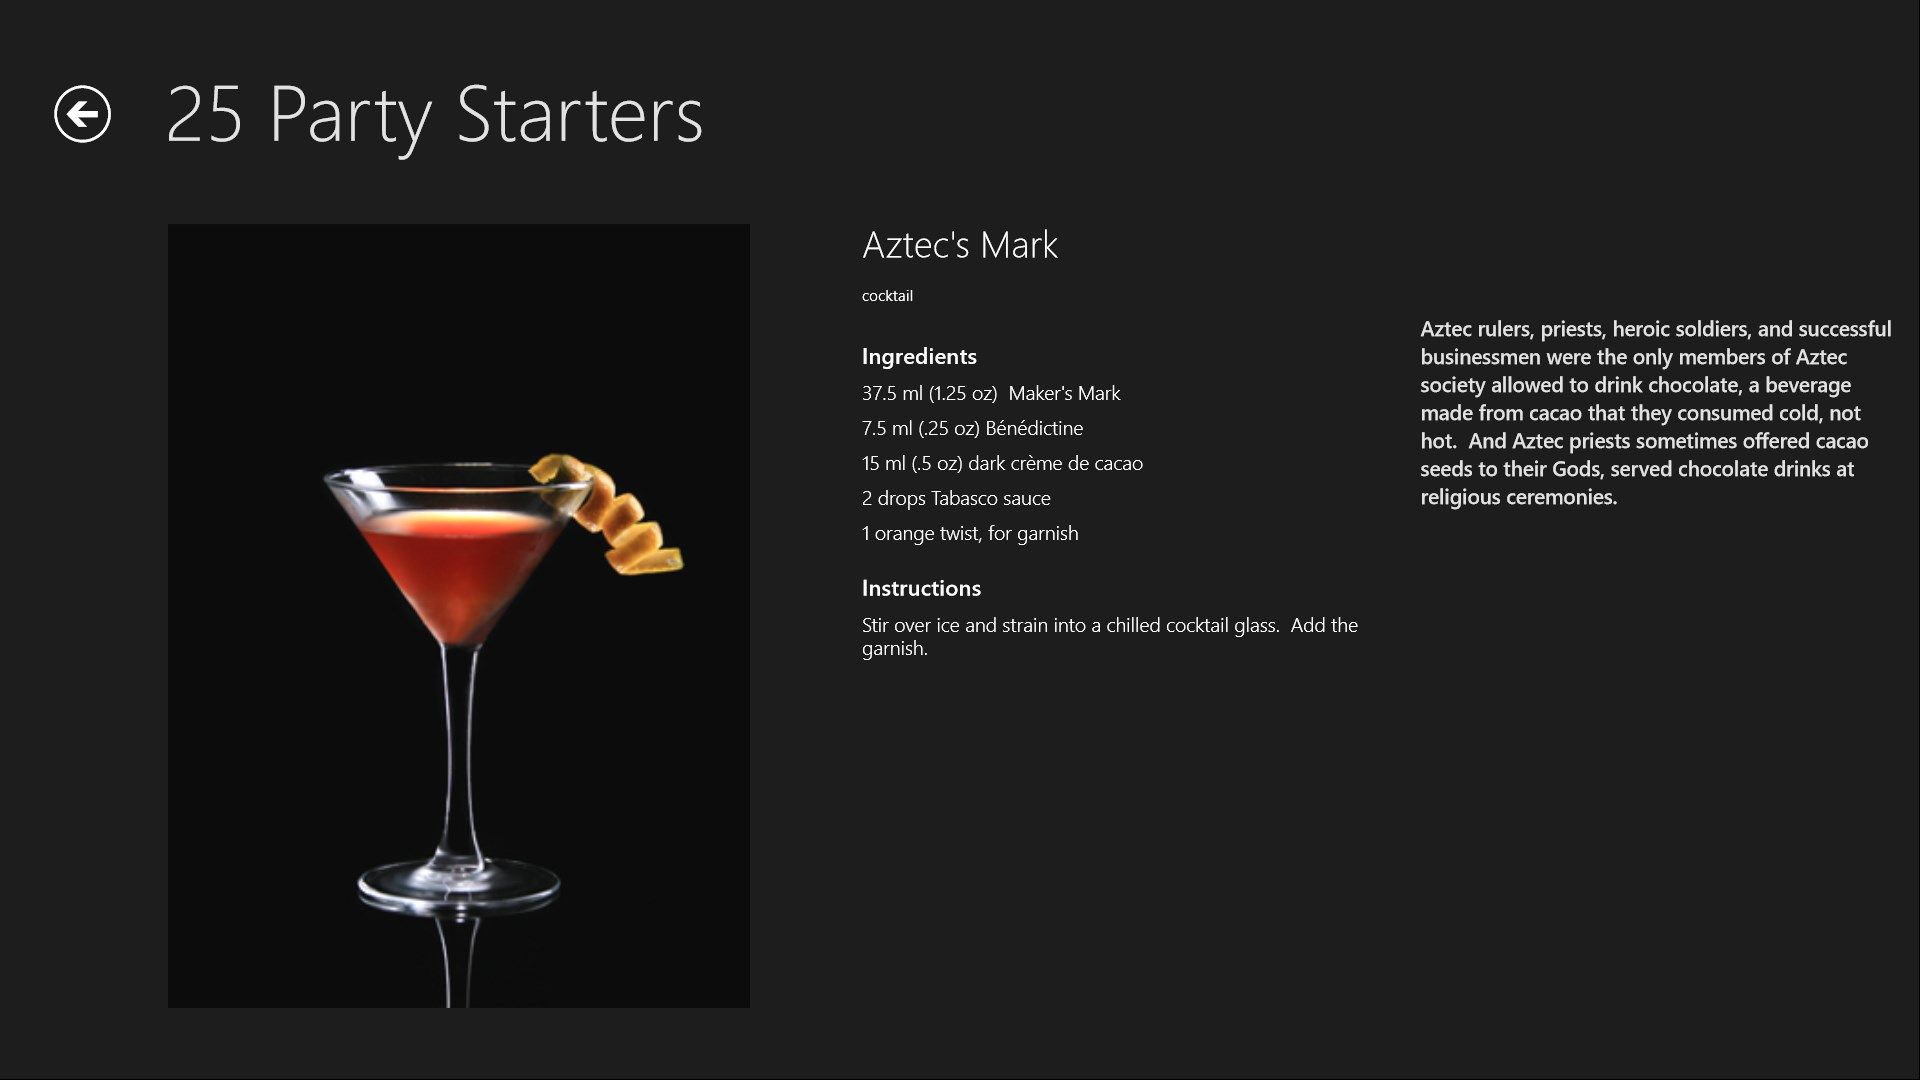 Each drink shows a beautiful image, ingredients directions and anecdotes